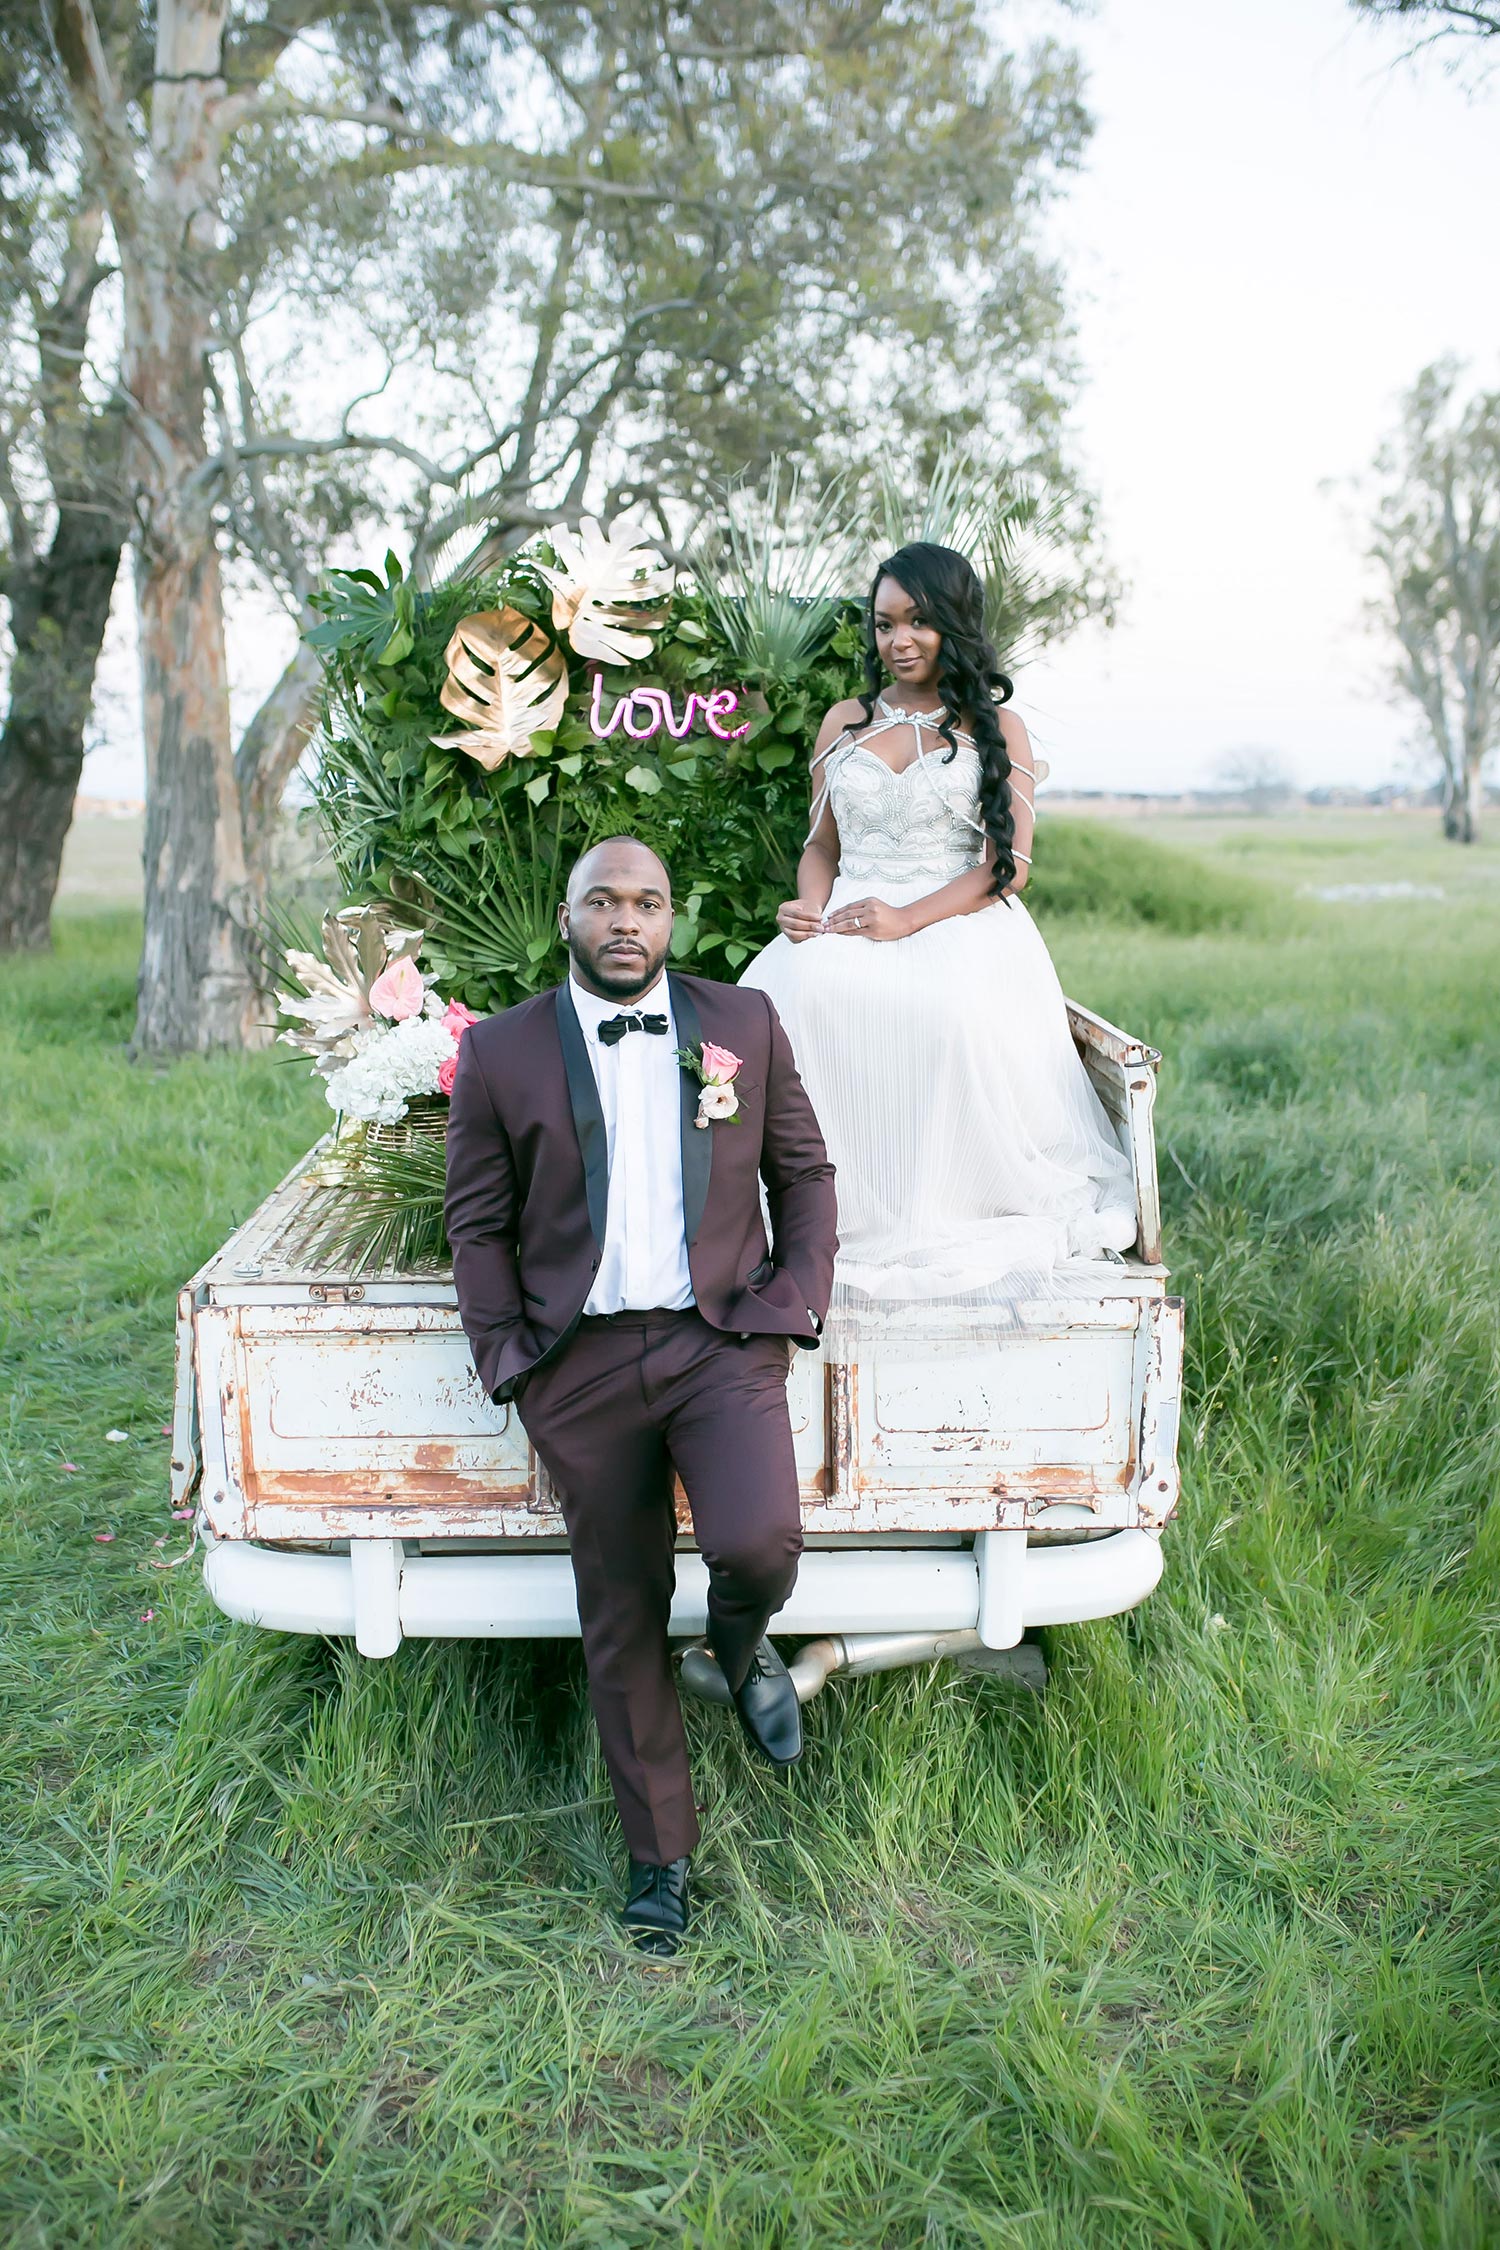 tropical wedding inspiration with an embellished wedding dress and burgundy groom suit